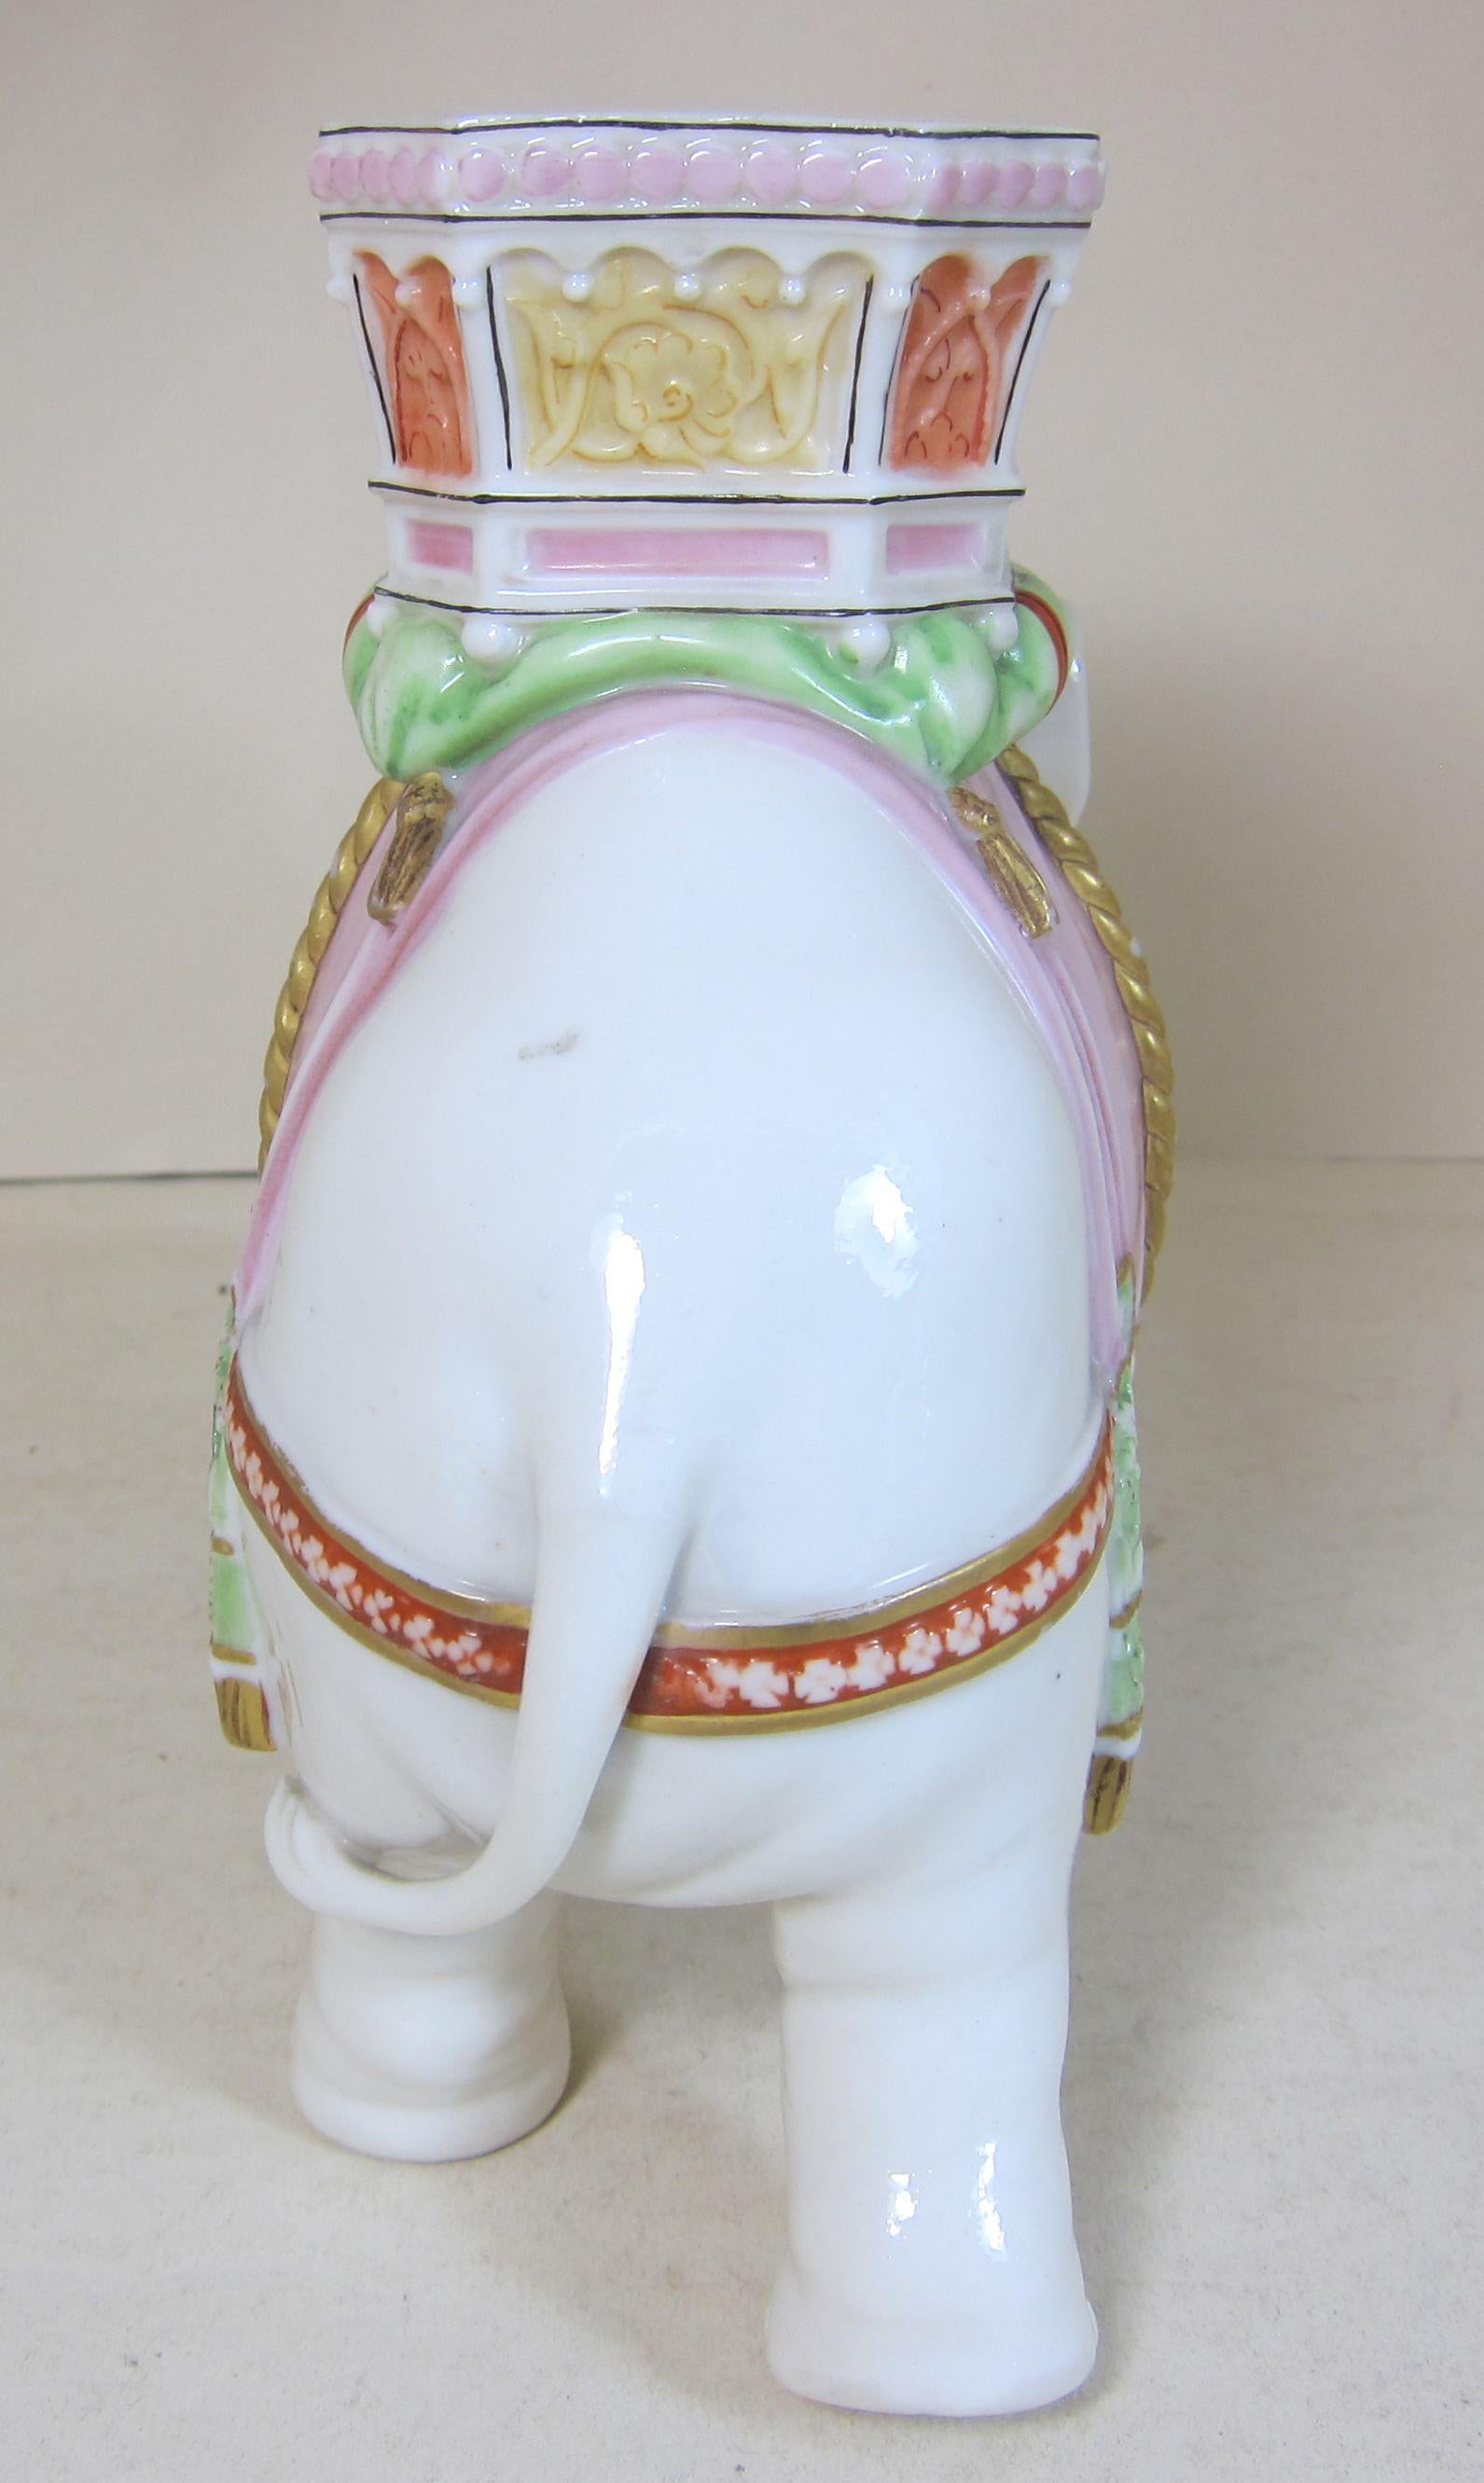 English Royal Worcester Porcelain Figure of an Elephant Modelled by James Hadley